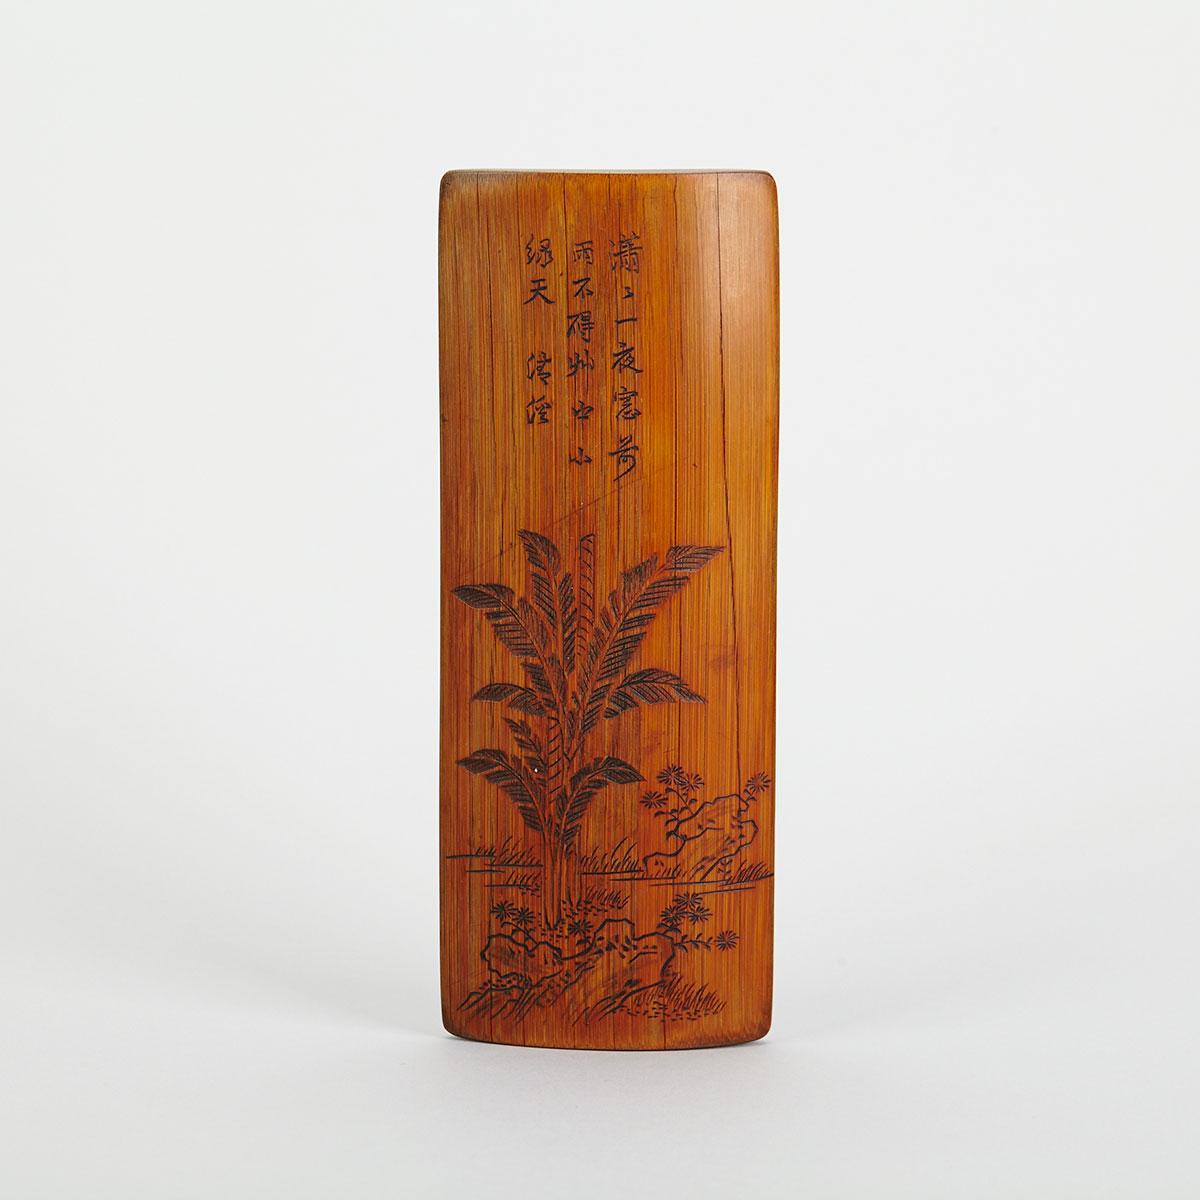 Inscribed Bamboo Wrist Rest